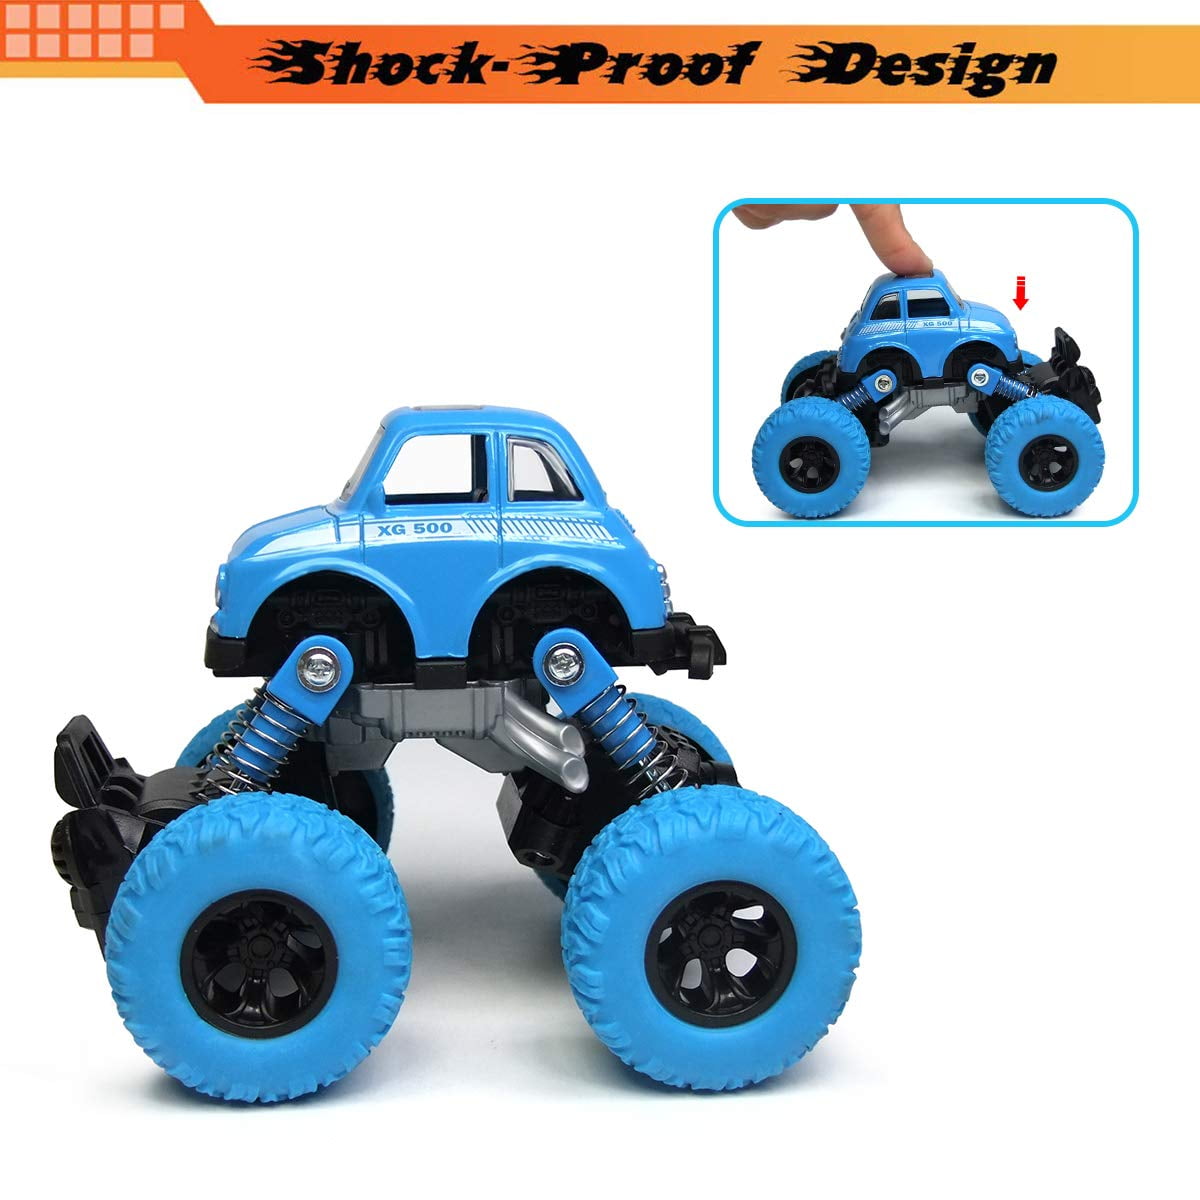 Epoch Air Pull Back Car Toys,Friction Powered Cars Boy Toys Vehicles Include 2 Motocycles with Fun Lights & Sounds for Children Kids Boys Girls 